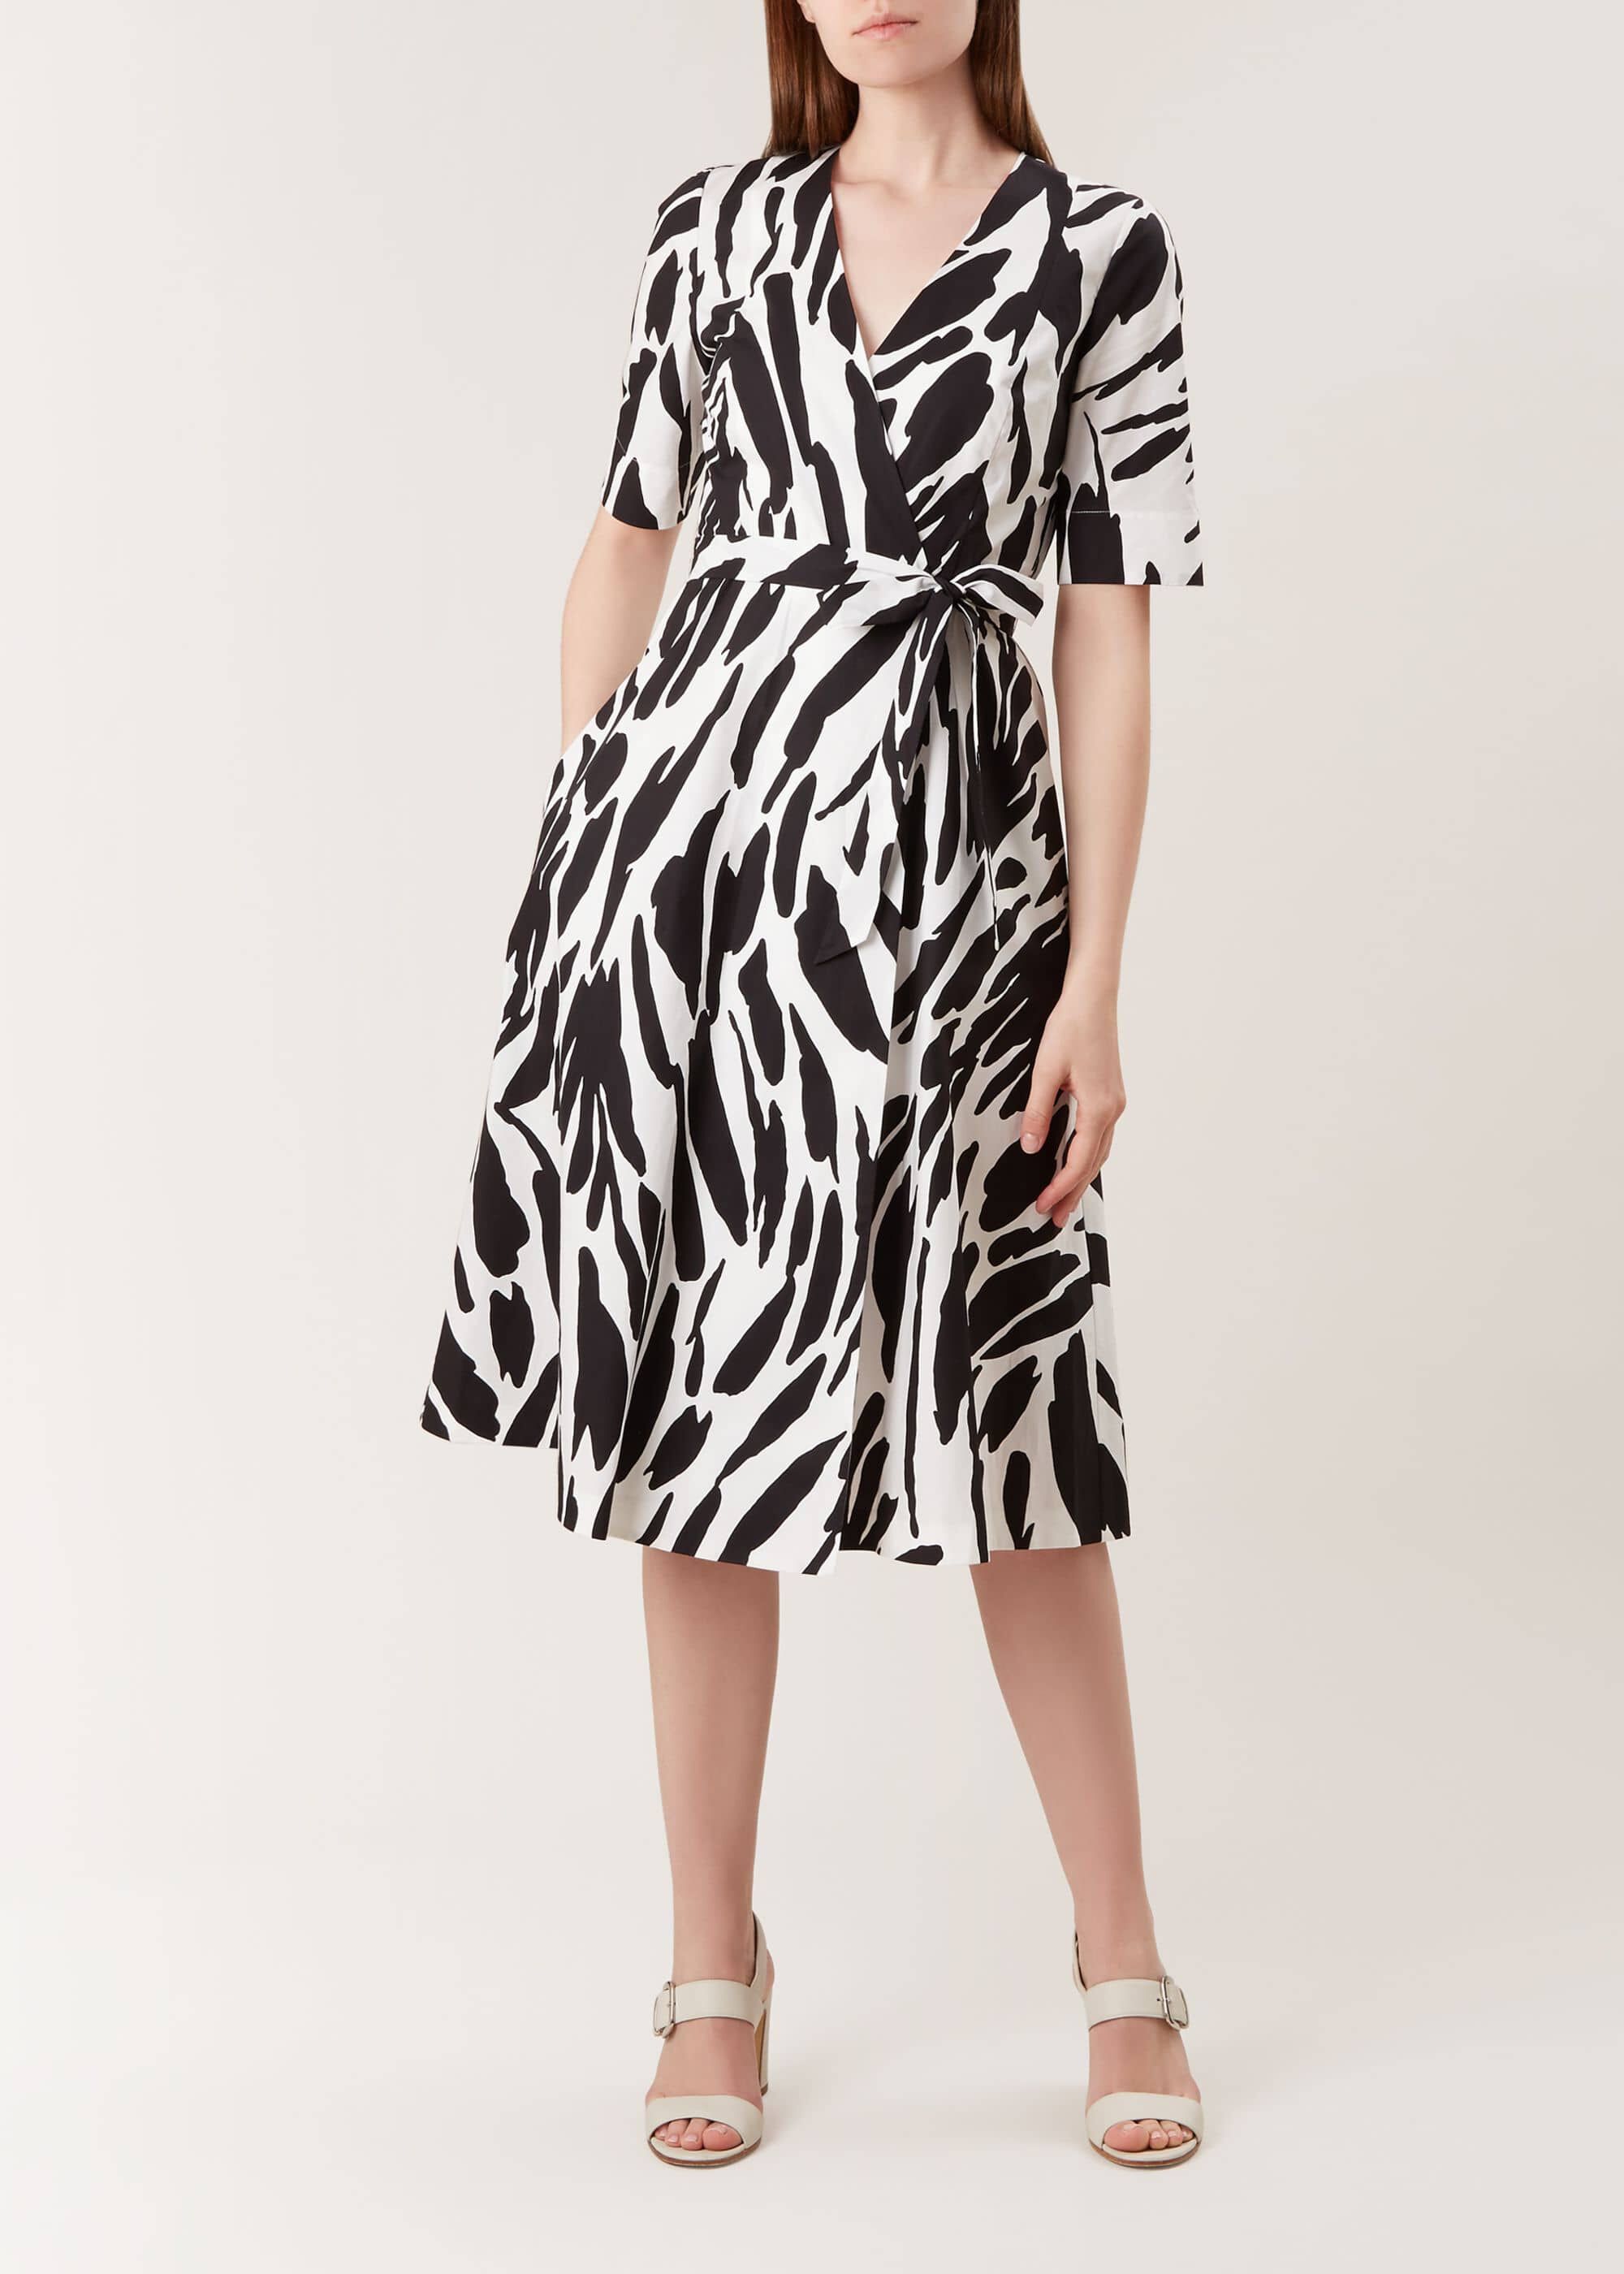 h and m black and white dress